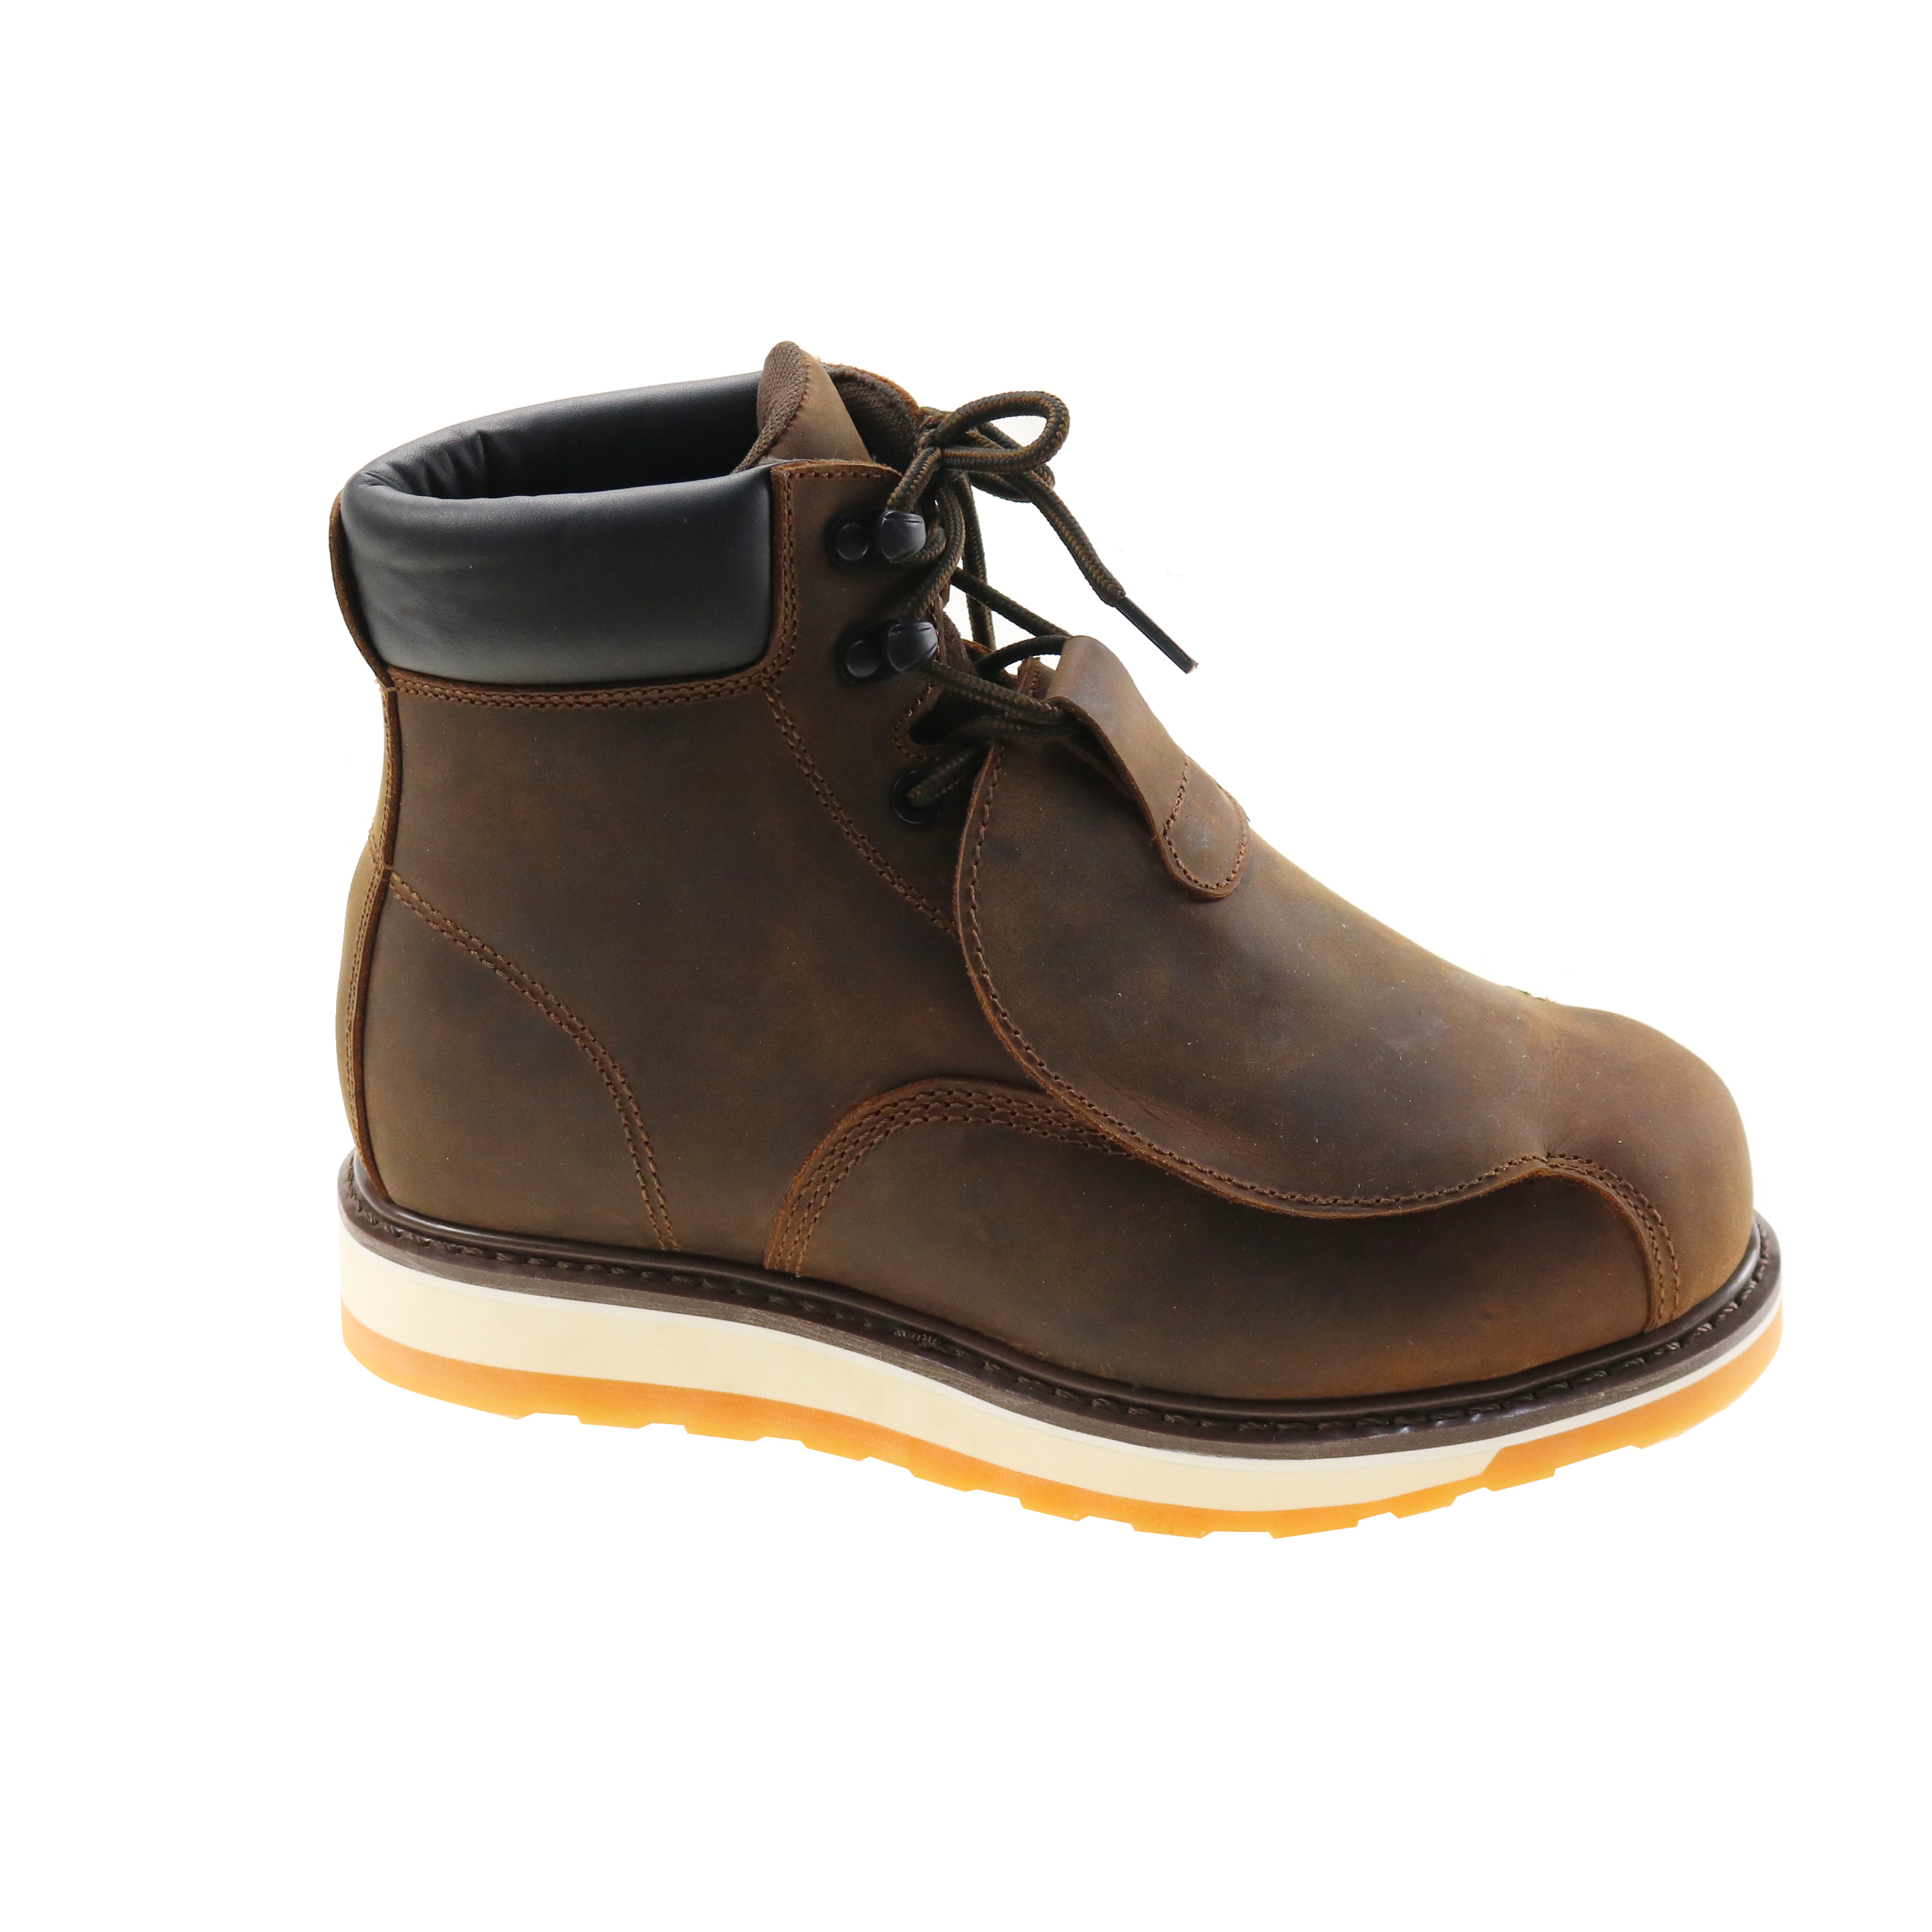 High Quality Industrial  Welt Safety Shoes with Genuine Leather and Steel Toe